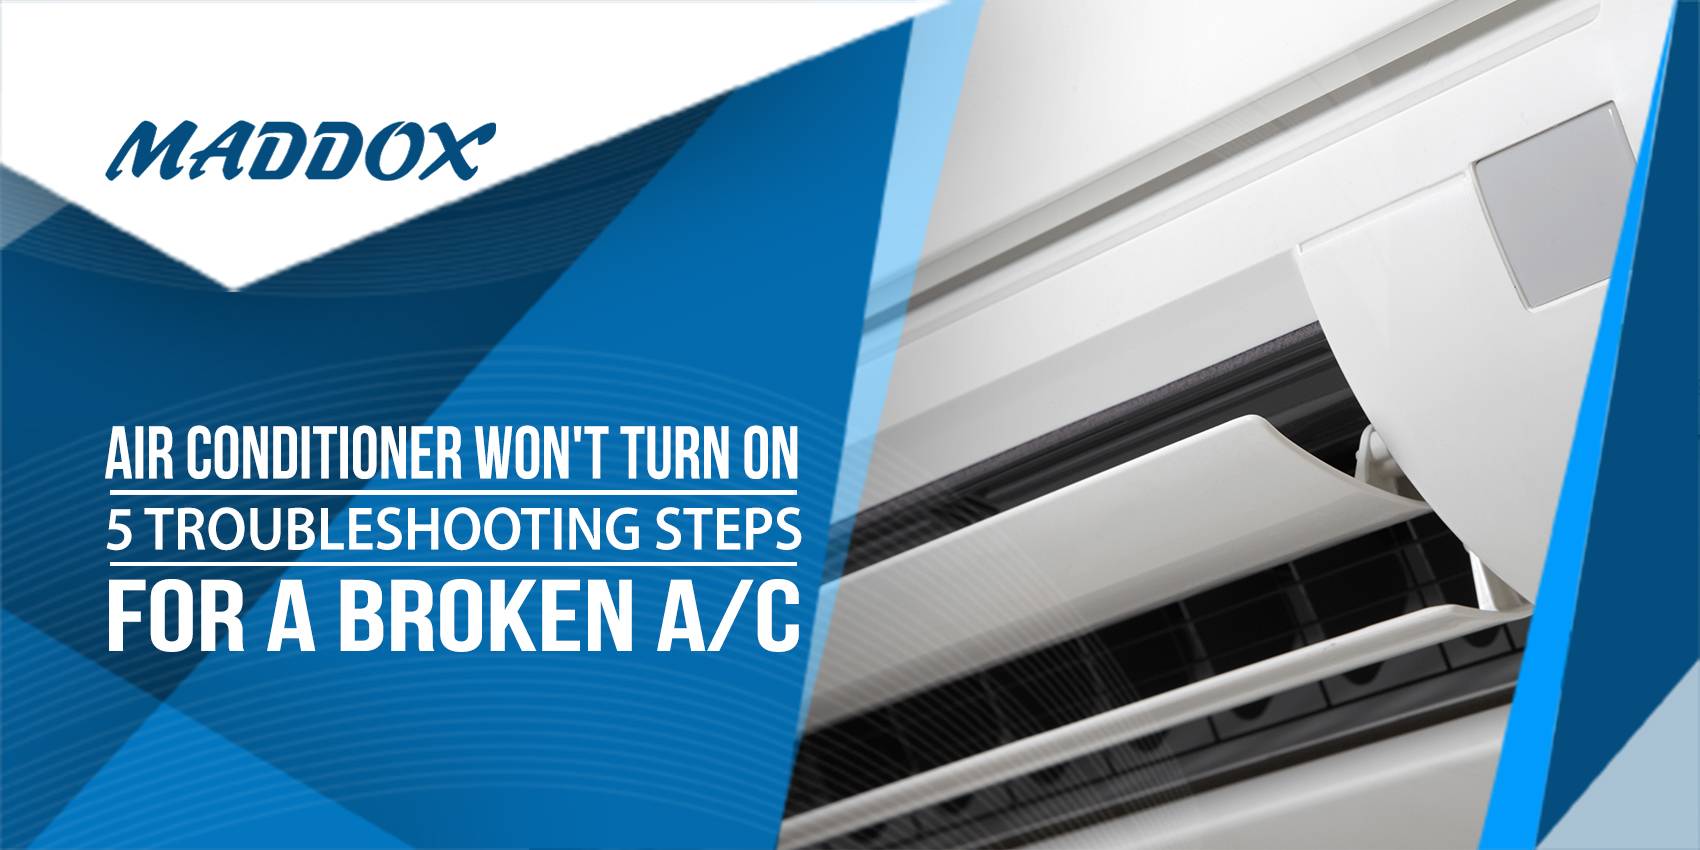 Air Conditioner Won't Turn On - 5 Troubleshooting Steps for a Broken A/C